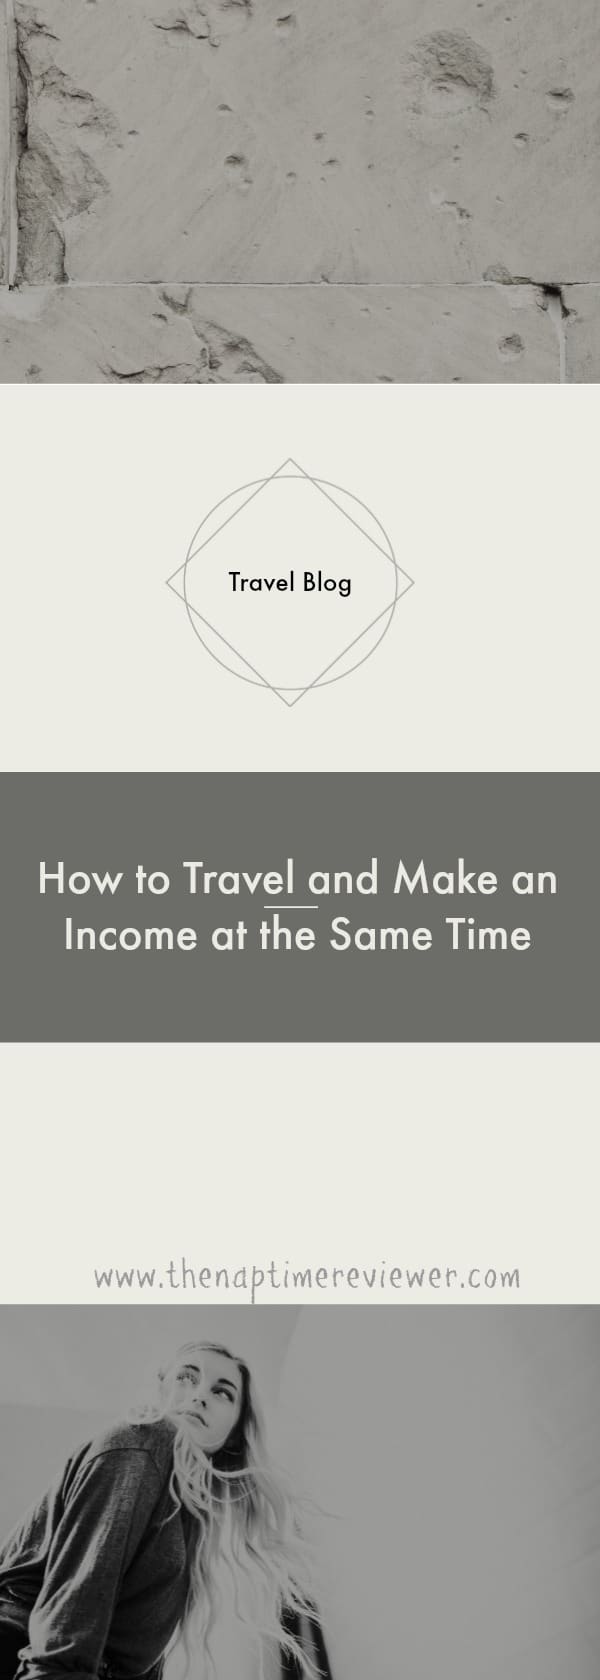 How to Travel and Make an Income at the Same Time